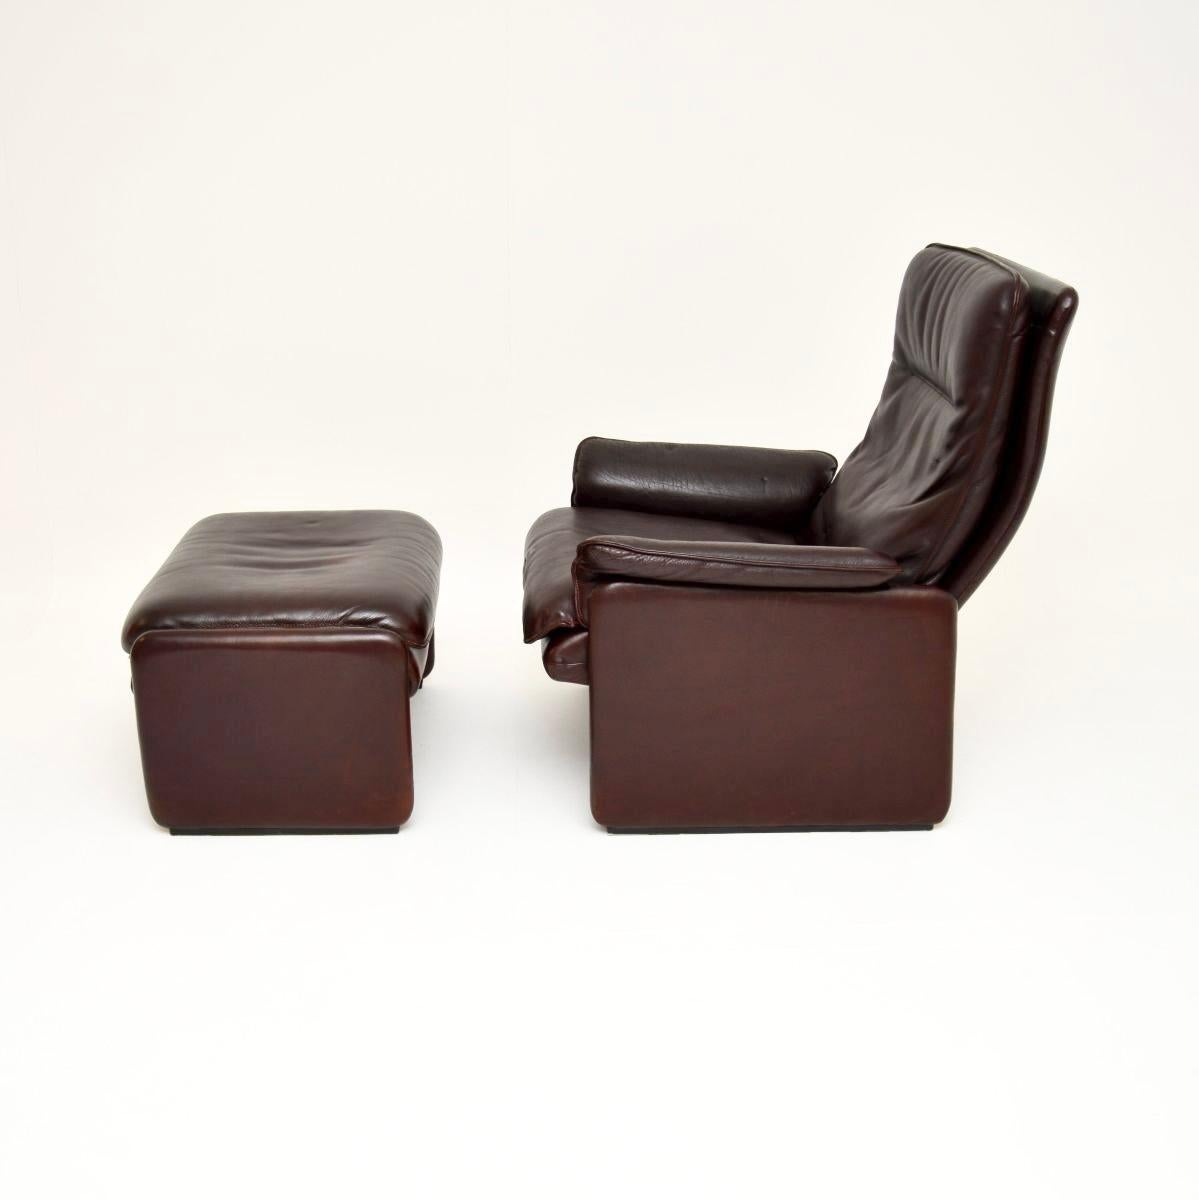 Swiss Vintage Leather Reclining Armchair and Stool by De Sede For Sale